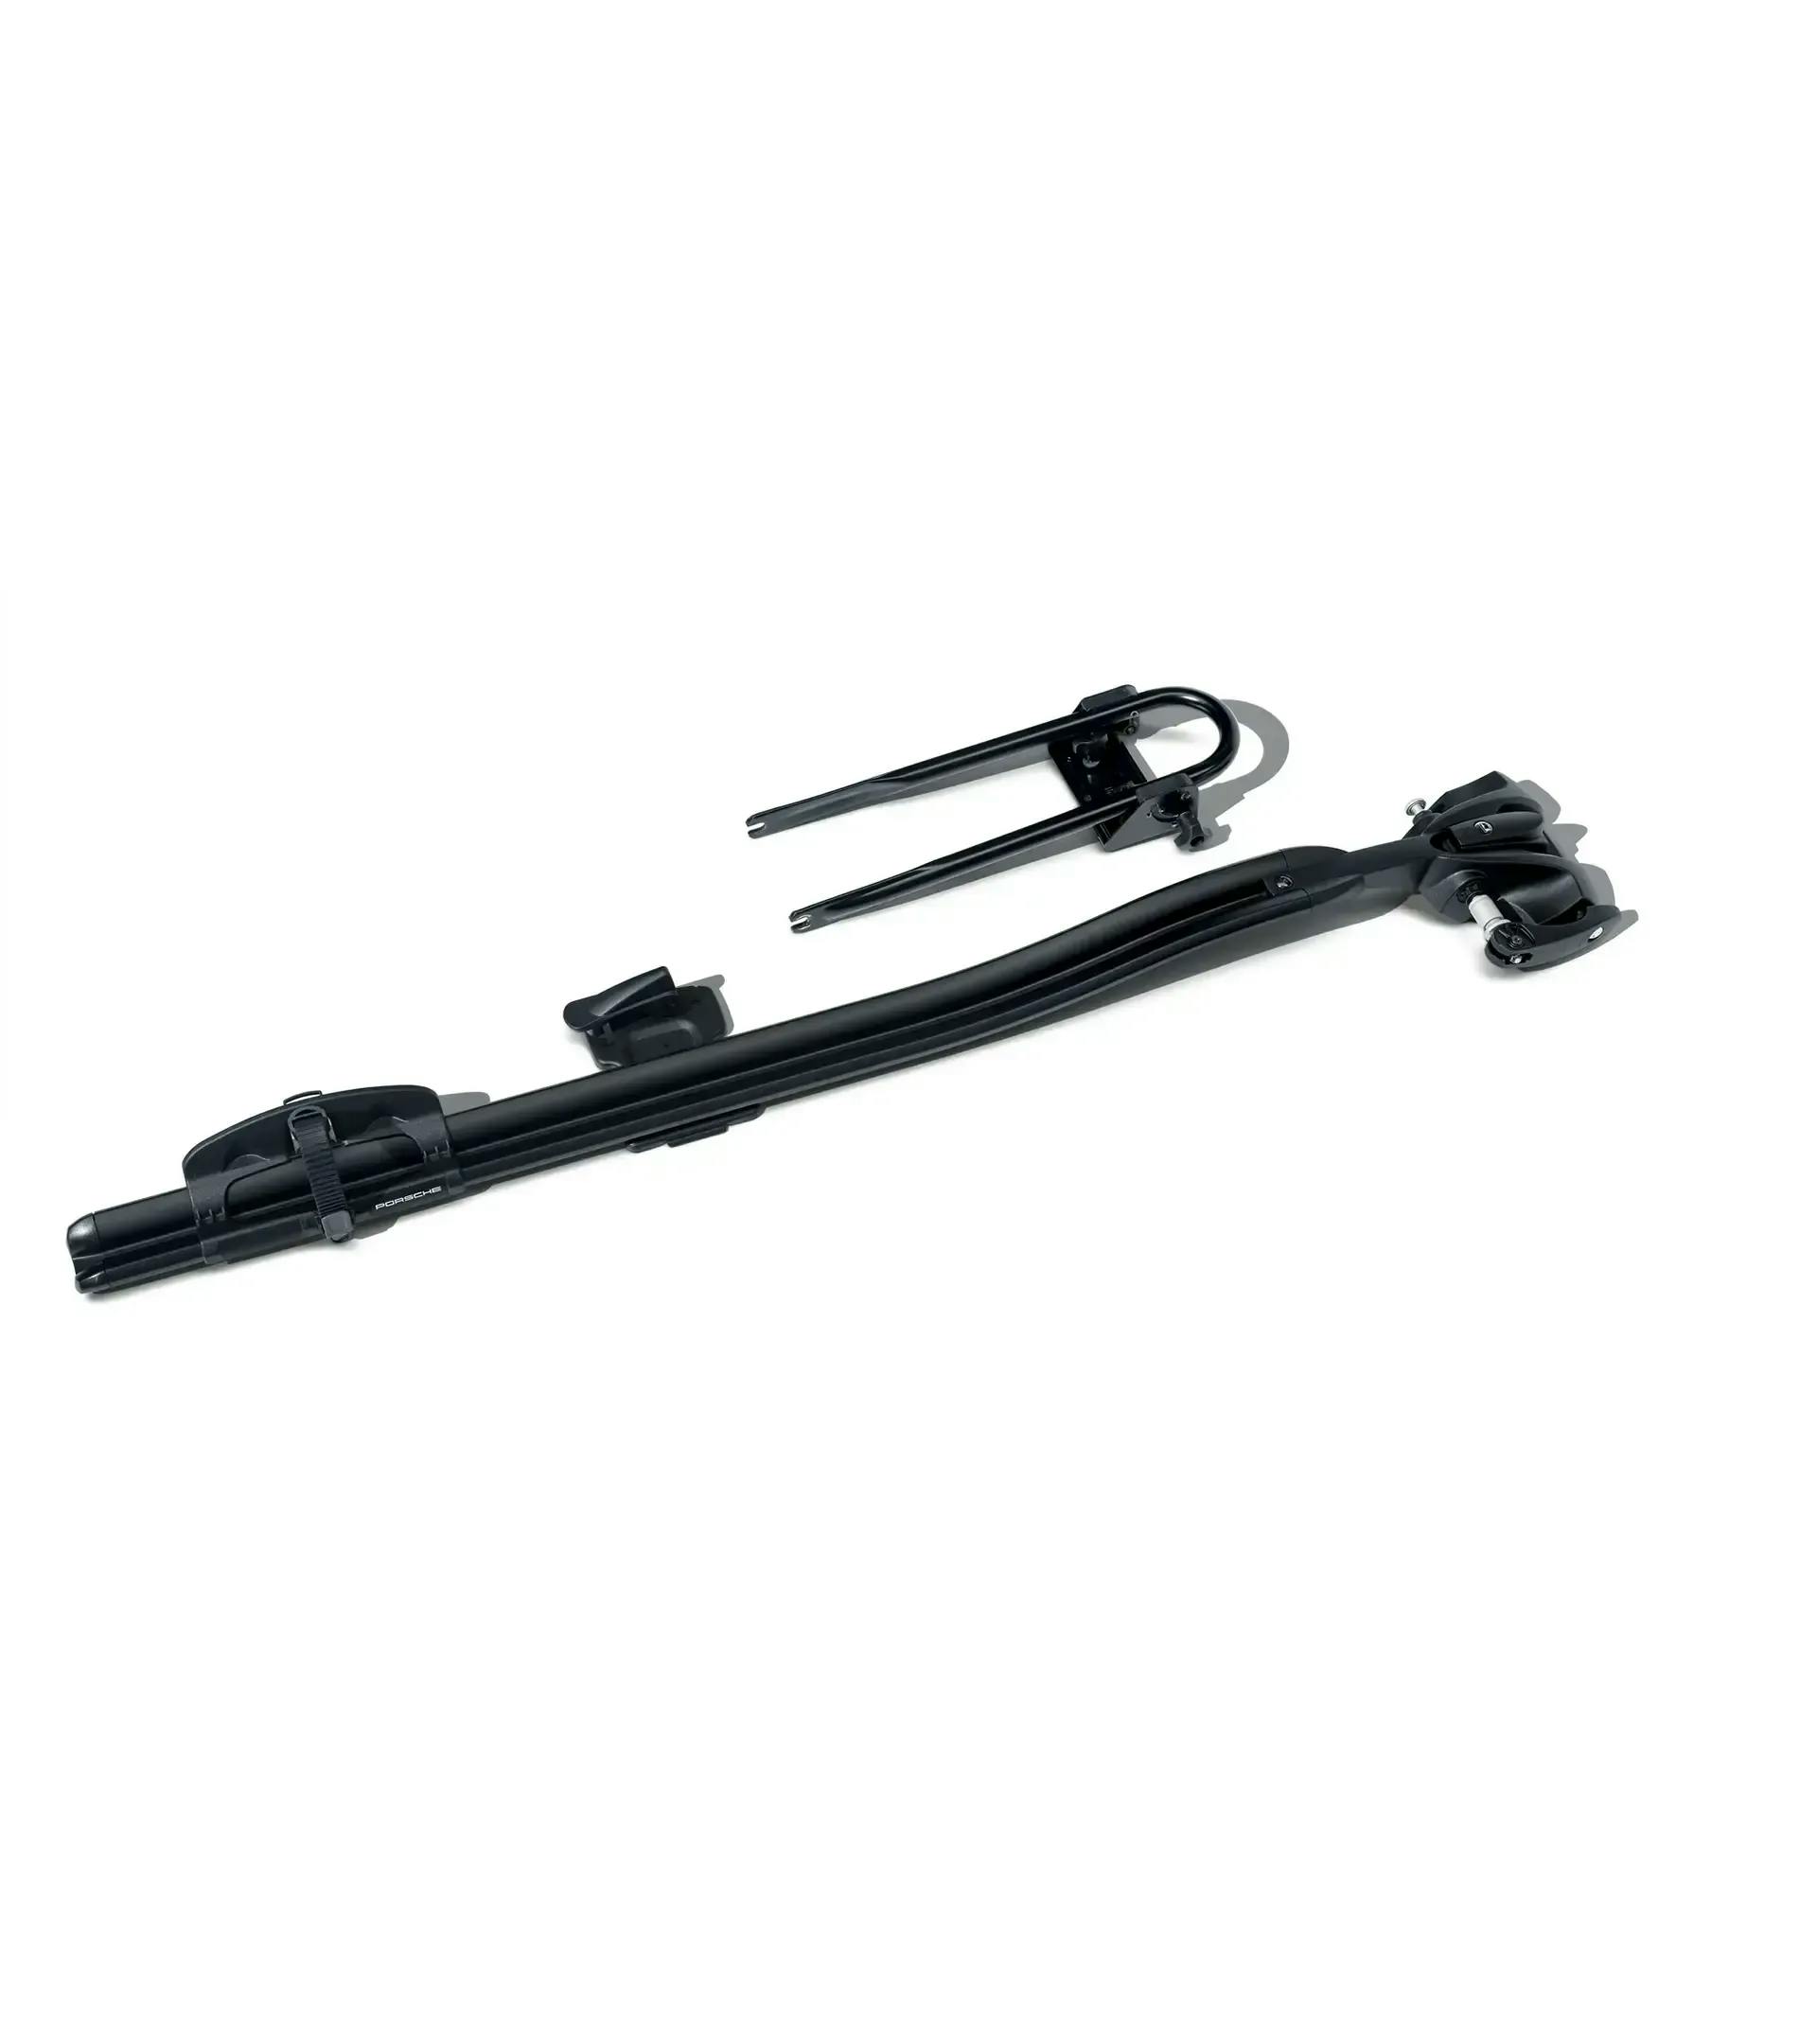 Racing bike carrier (with front wheel holder) 1